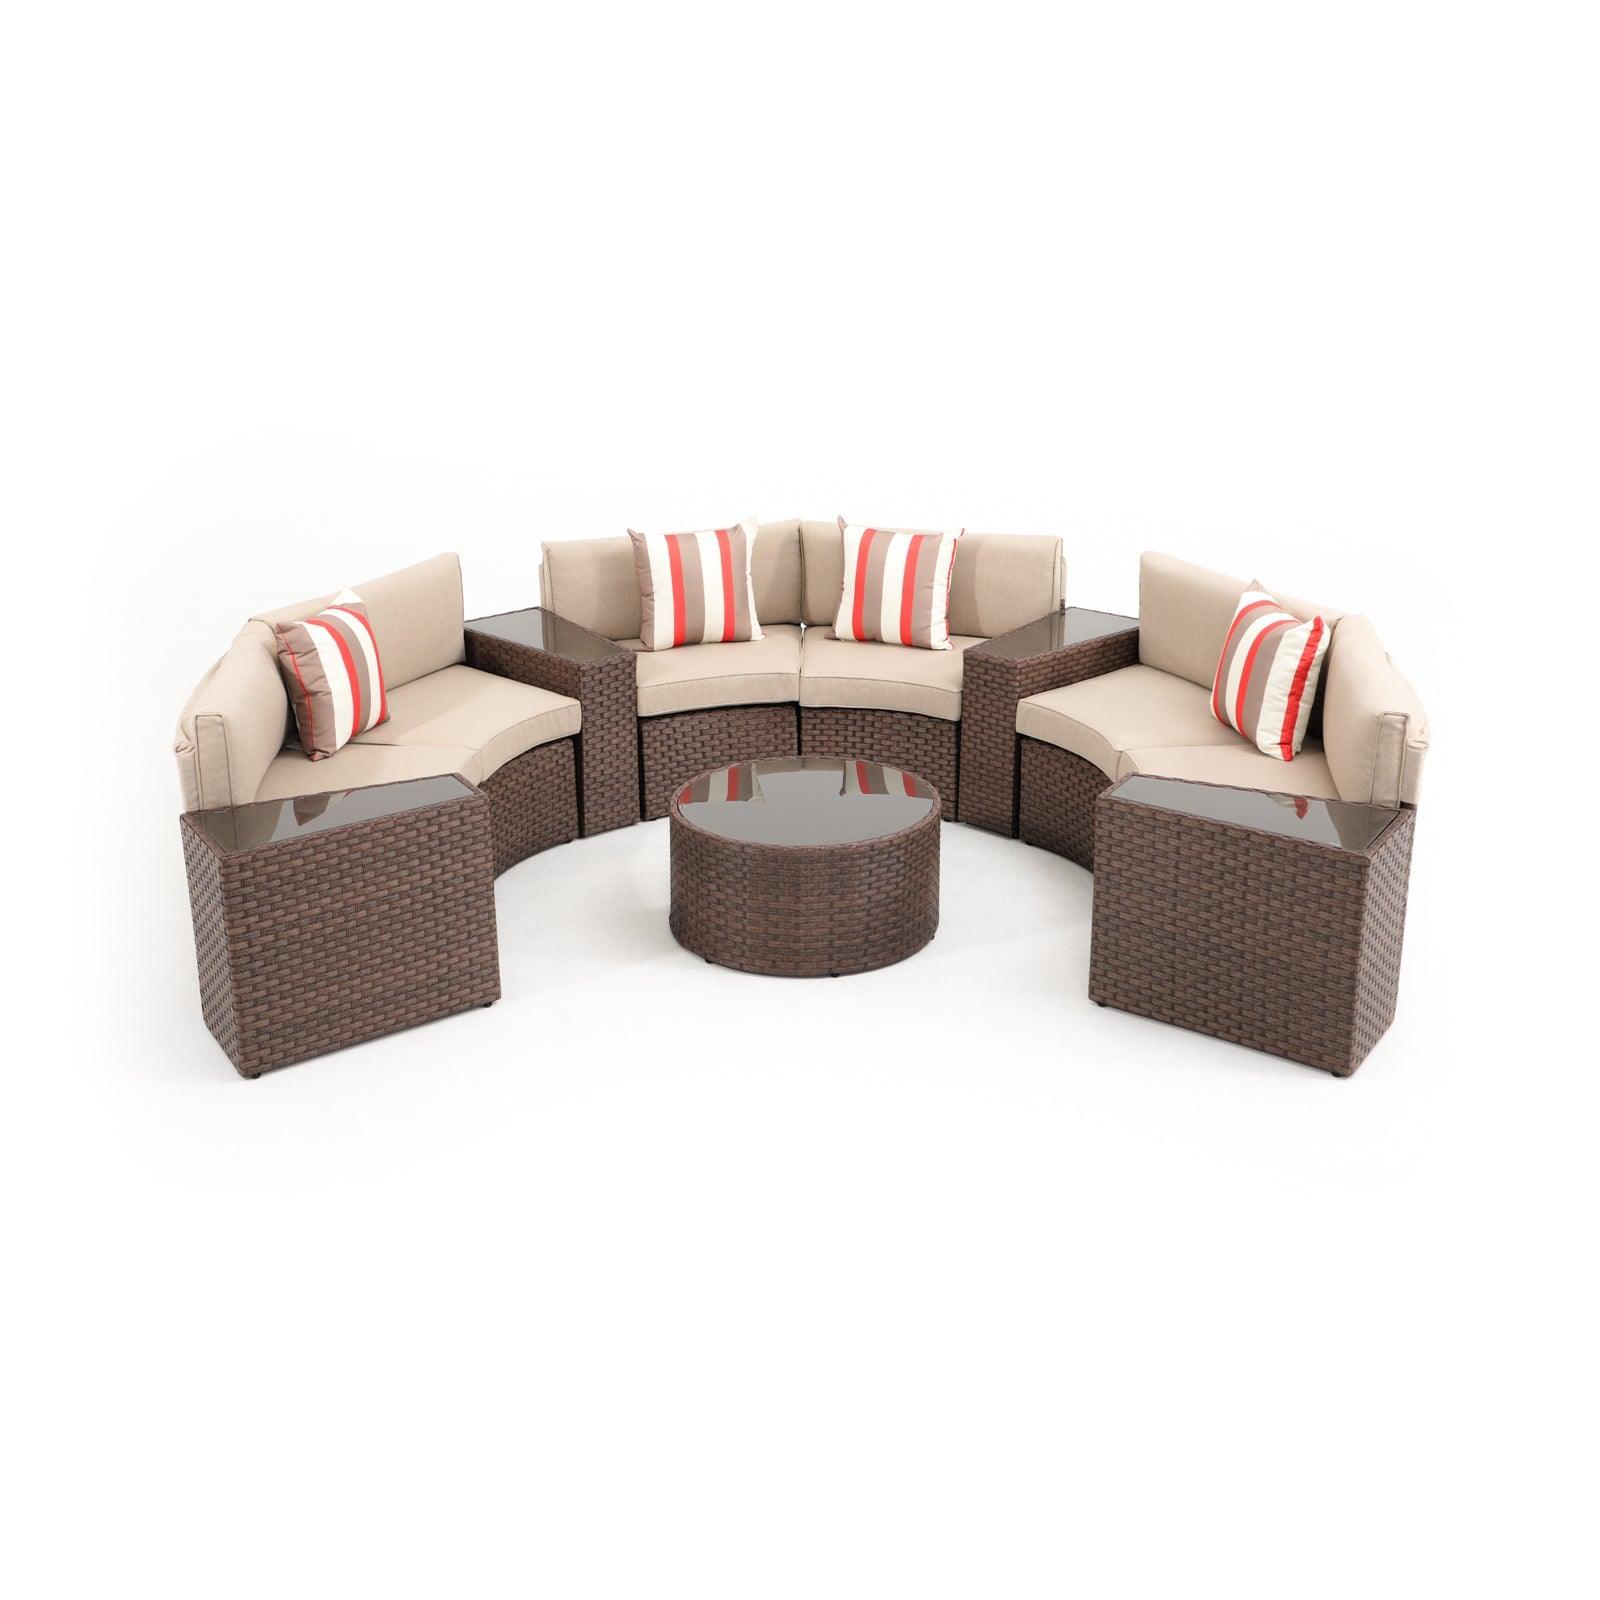 Boboli 11-piece Brown Wicker Curved Sectional Set with beige cushions, 1 Round Glass Coffee Table + 4 glass top side tables + 6 sectional sofas, front - Jardina Furniture #color_Brown #piece_9-pc.